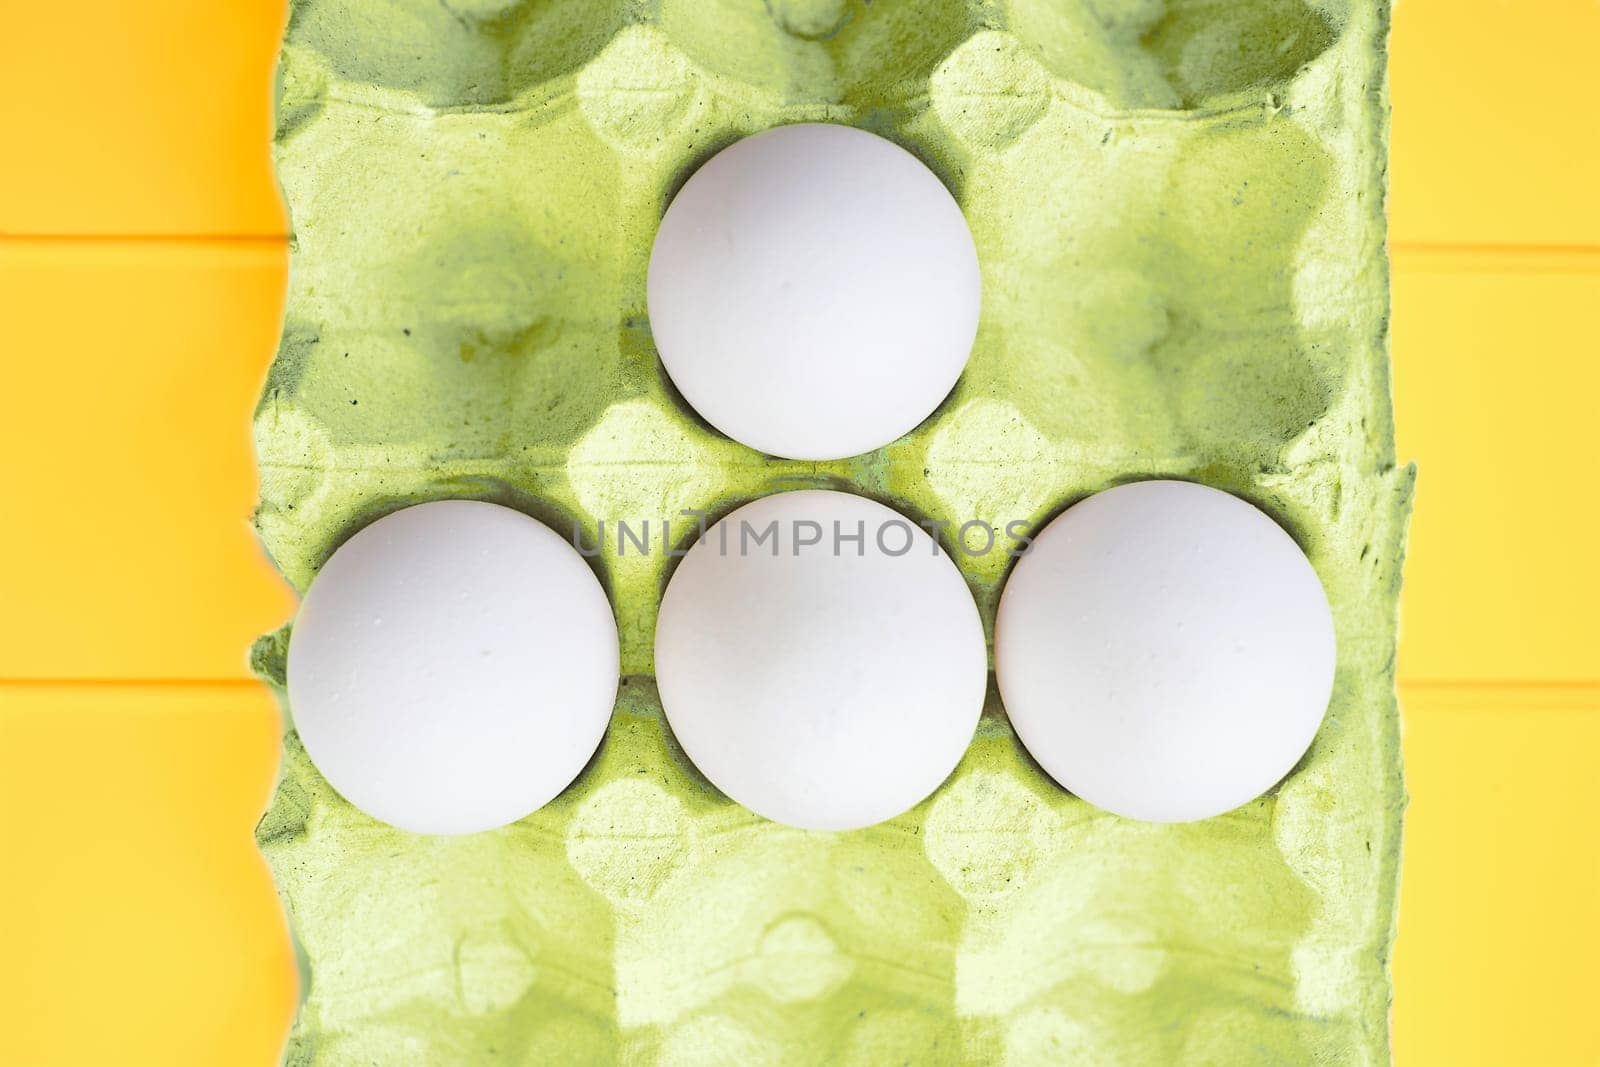 Abstract four white eggs in a packing carton on a plastic surface by jovani68